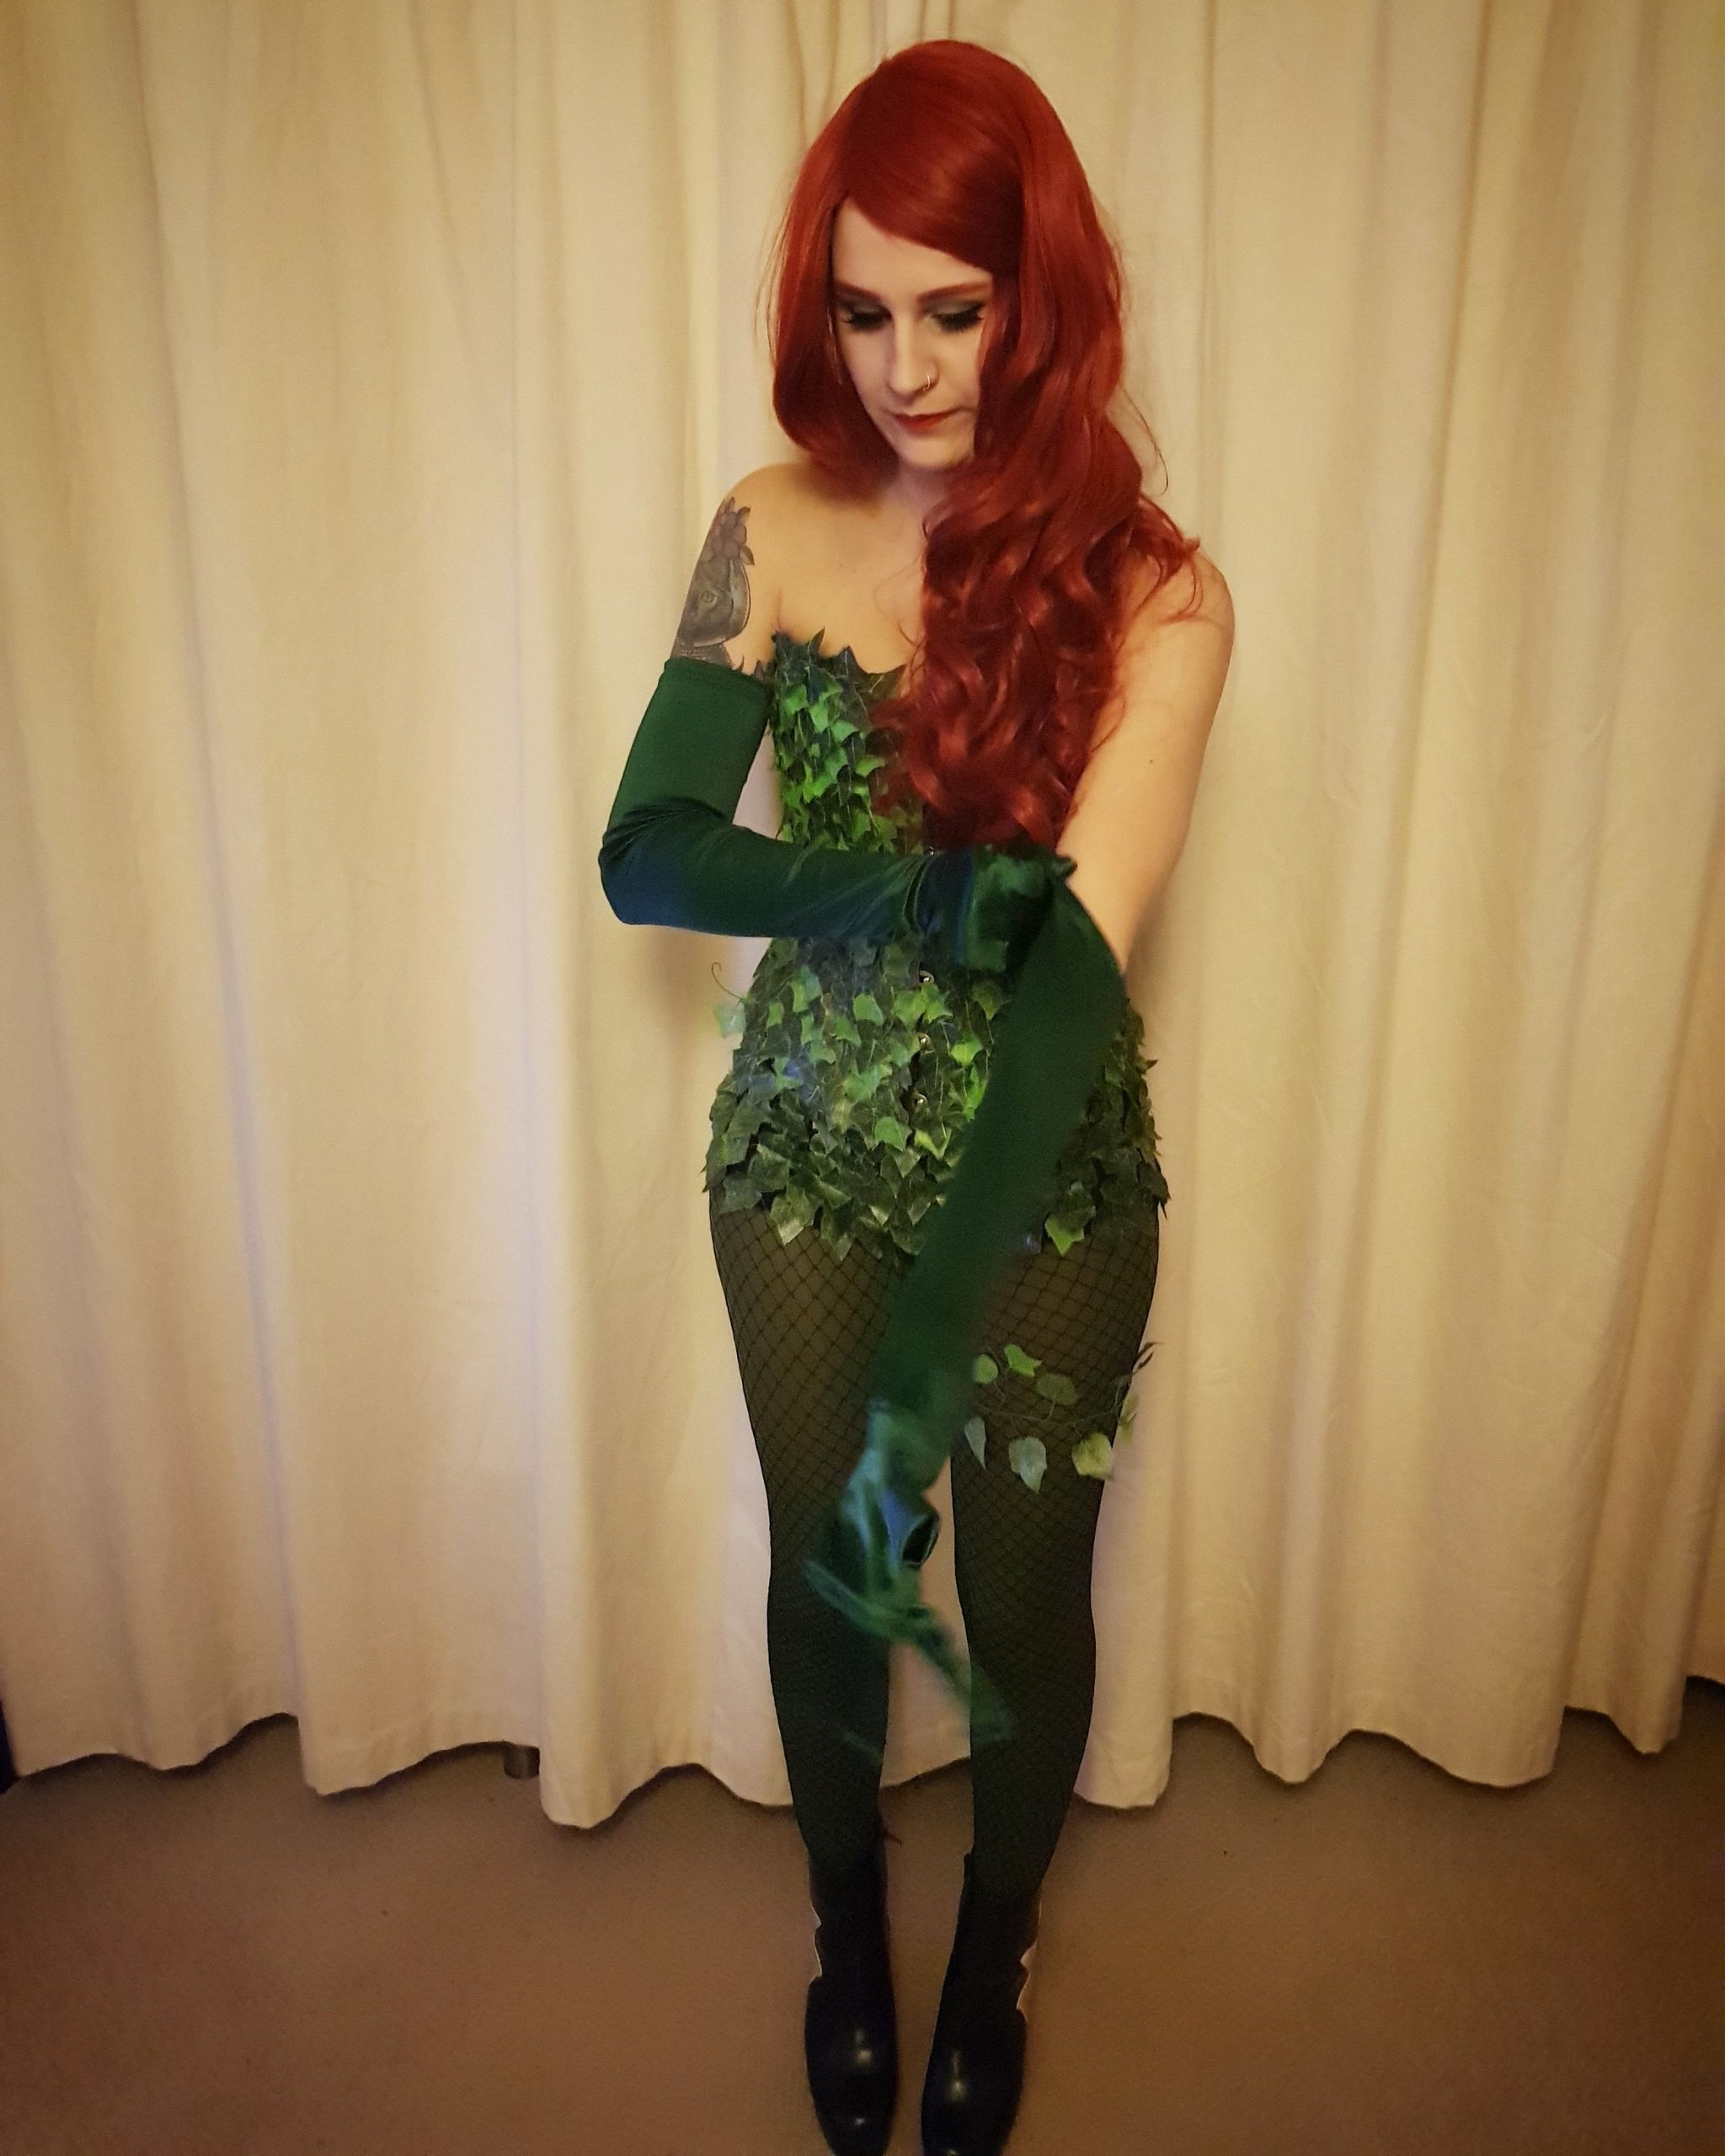 Poison Ivy DIY Costume
 [Self] Poison Ivy costume many hours were spent glue